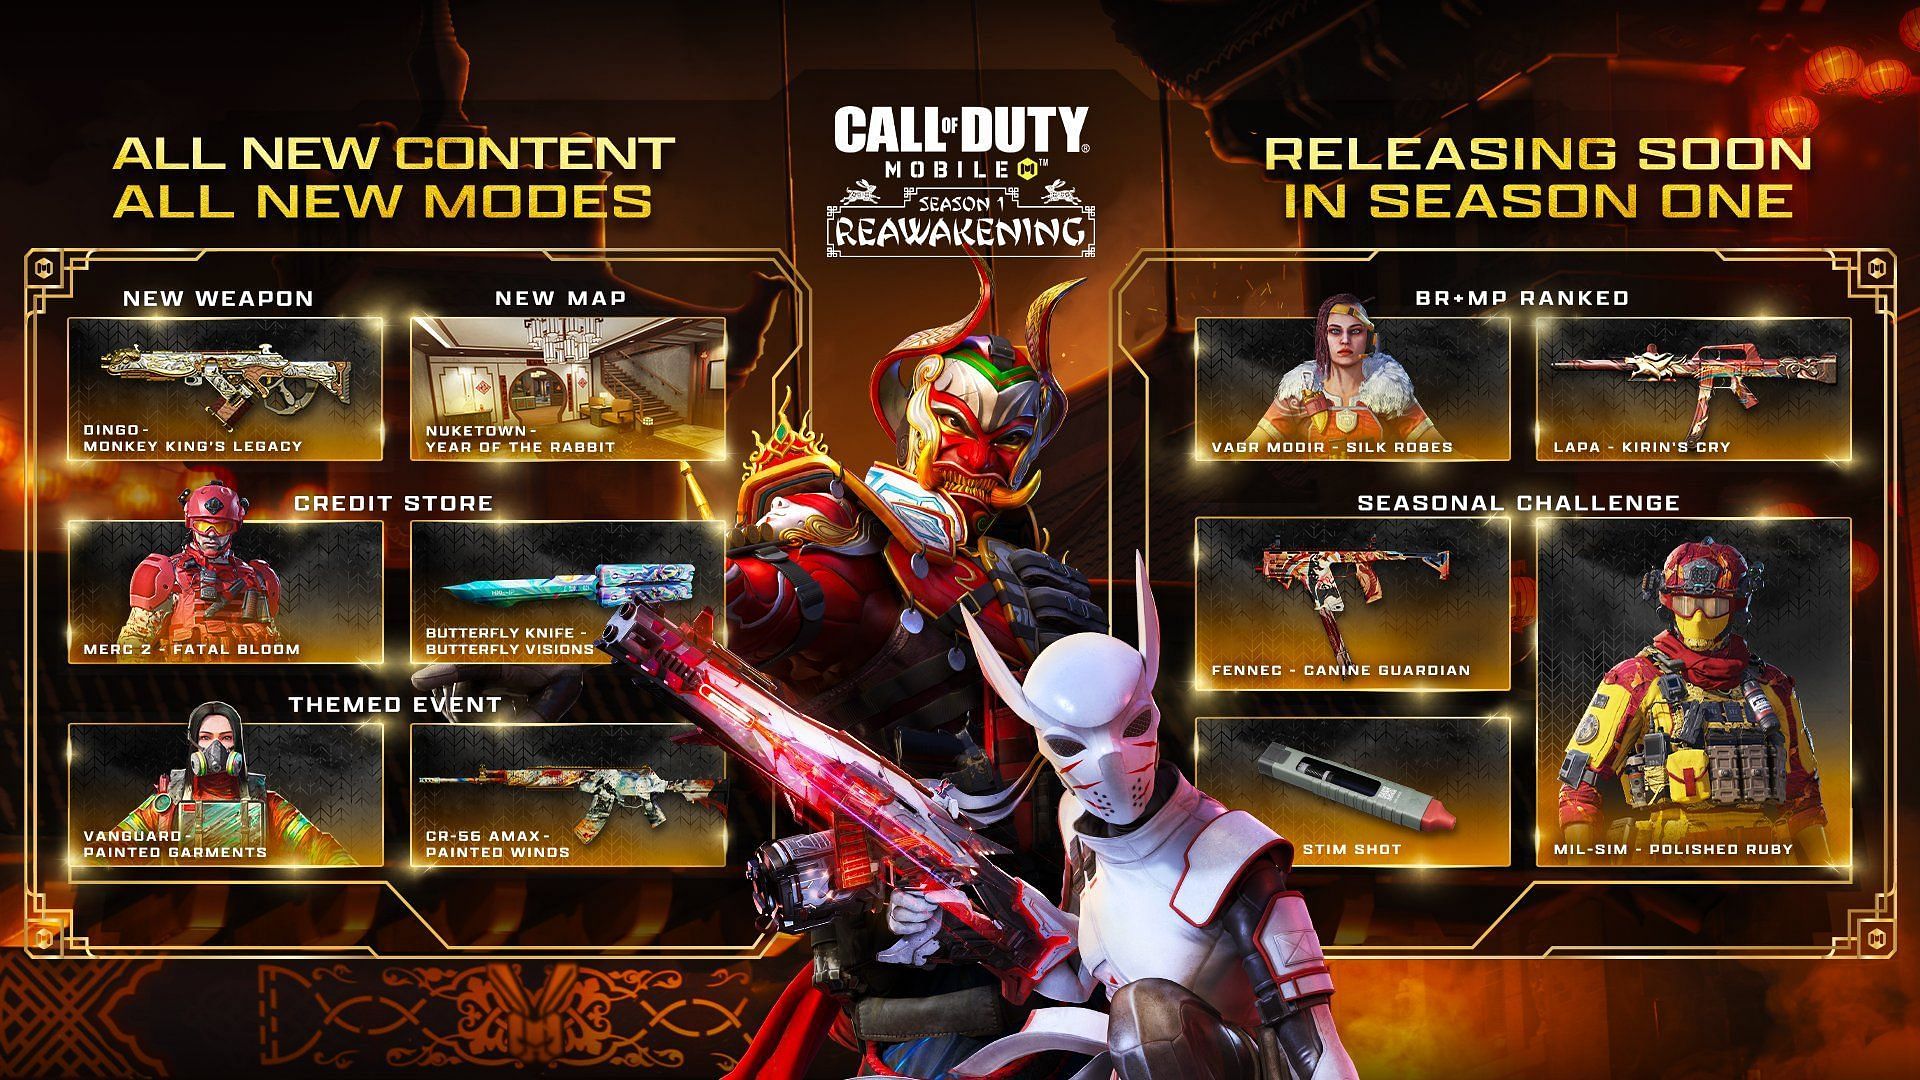 COD Mobile Season 1 introduces several new modes and content (image via Activision)